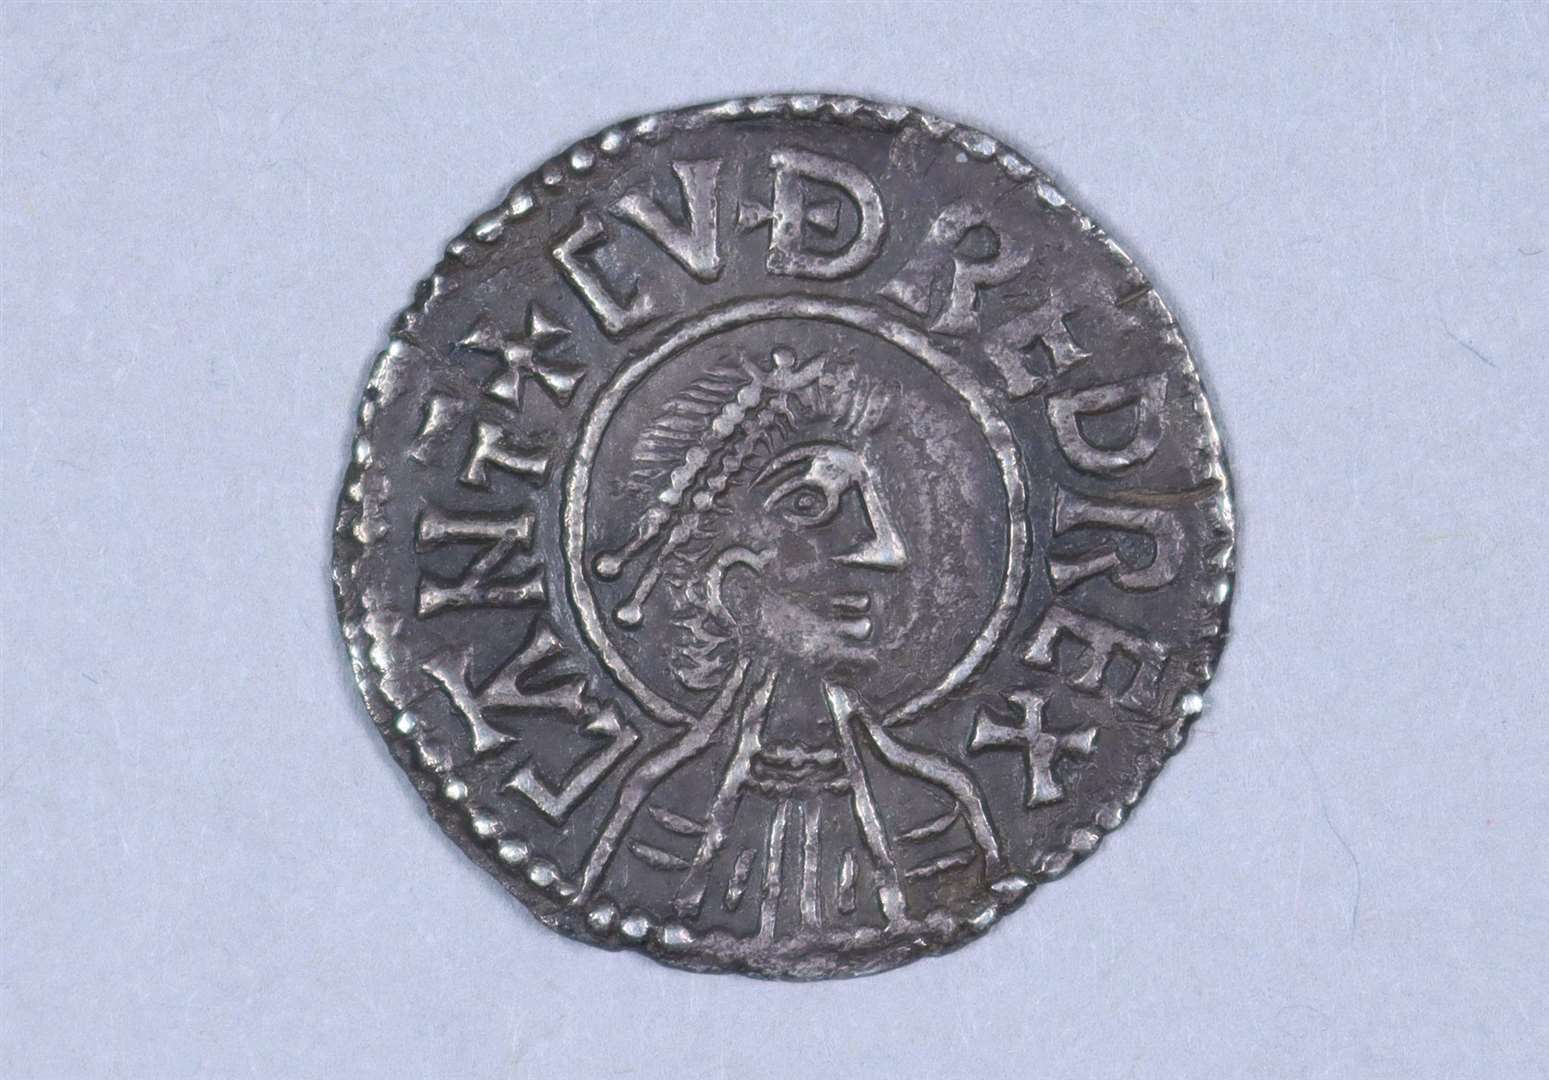 A silver portrait penny from the years 798-807 commemorates Cuthred, King of Kent